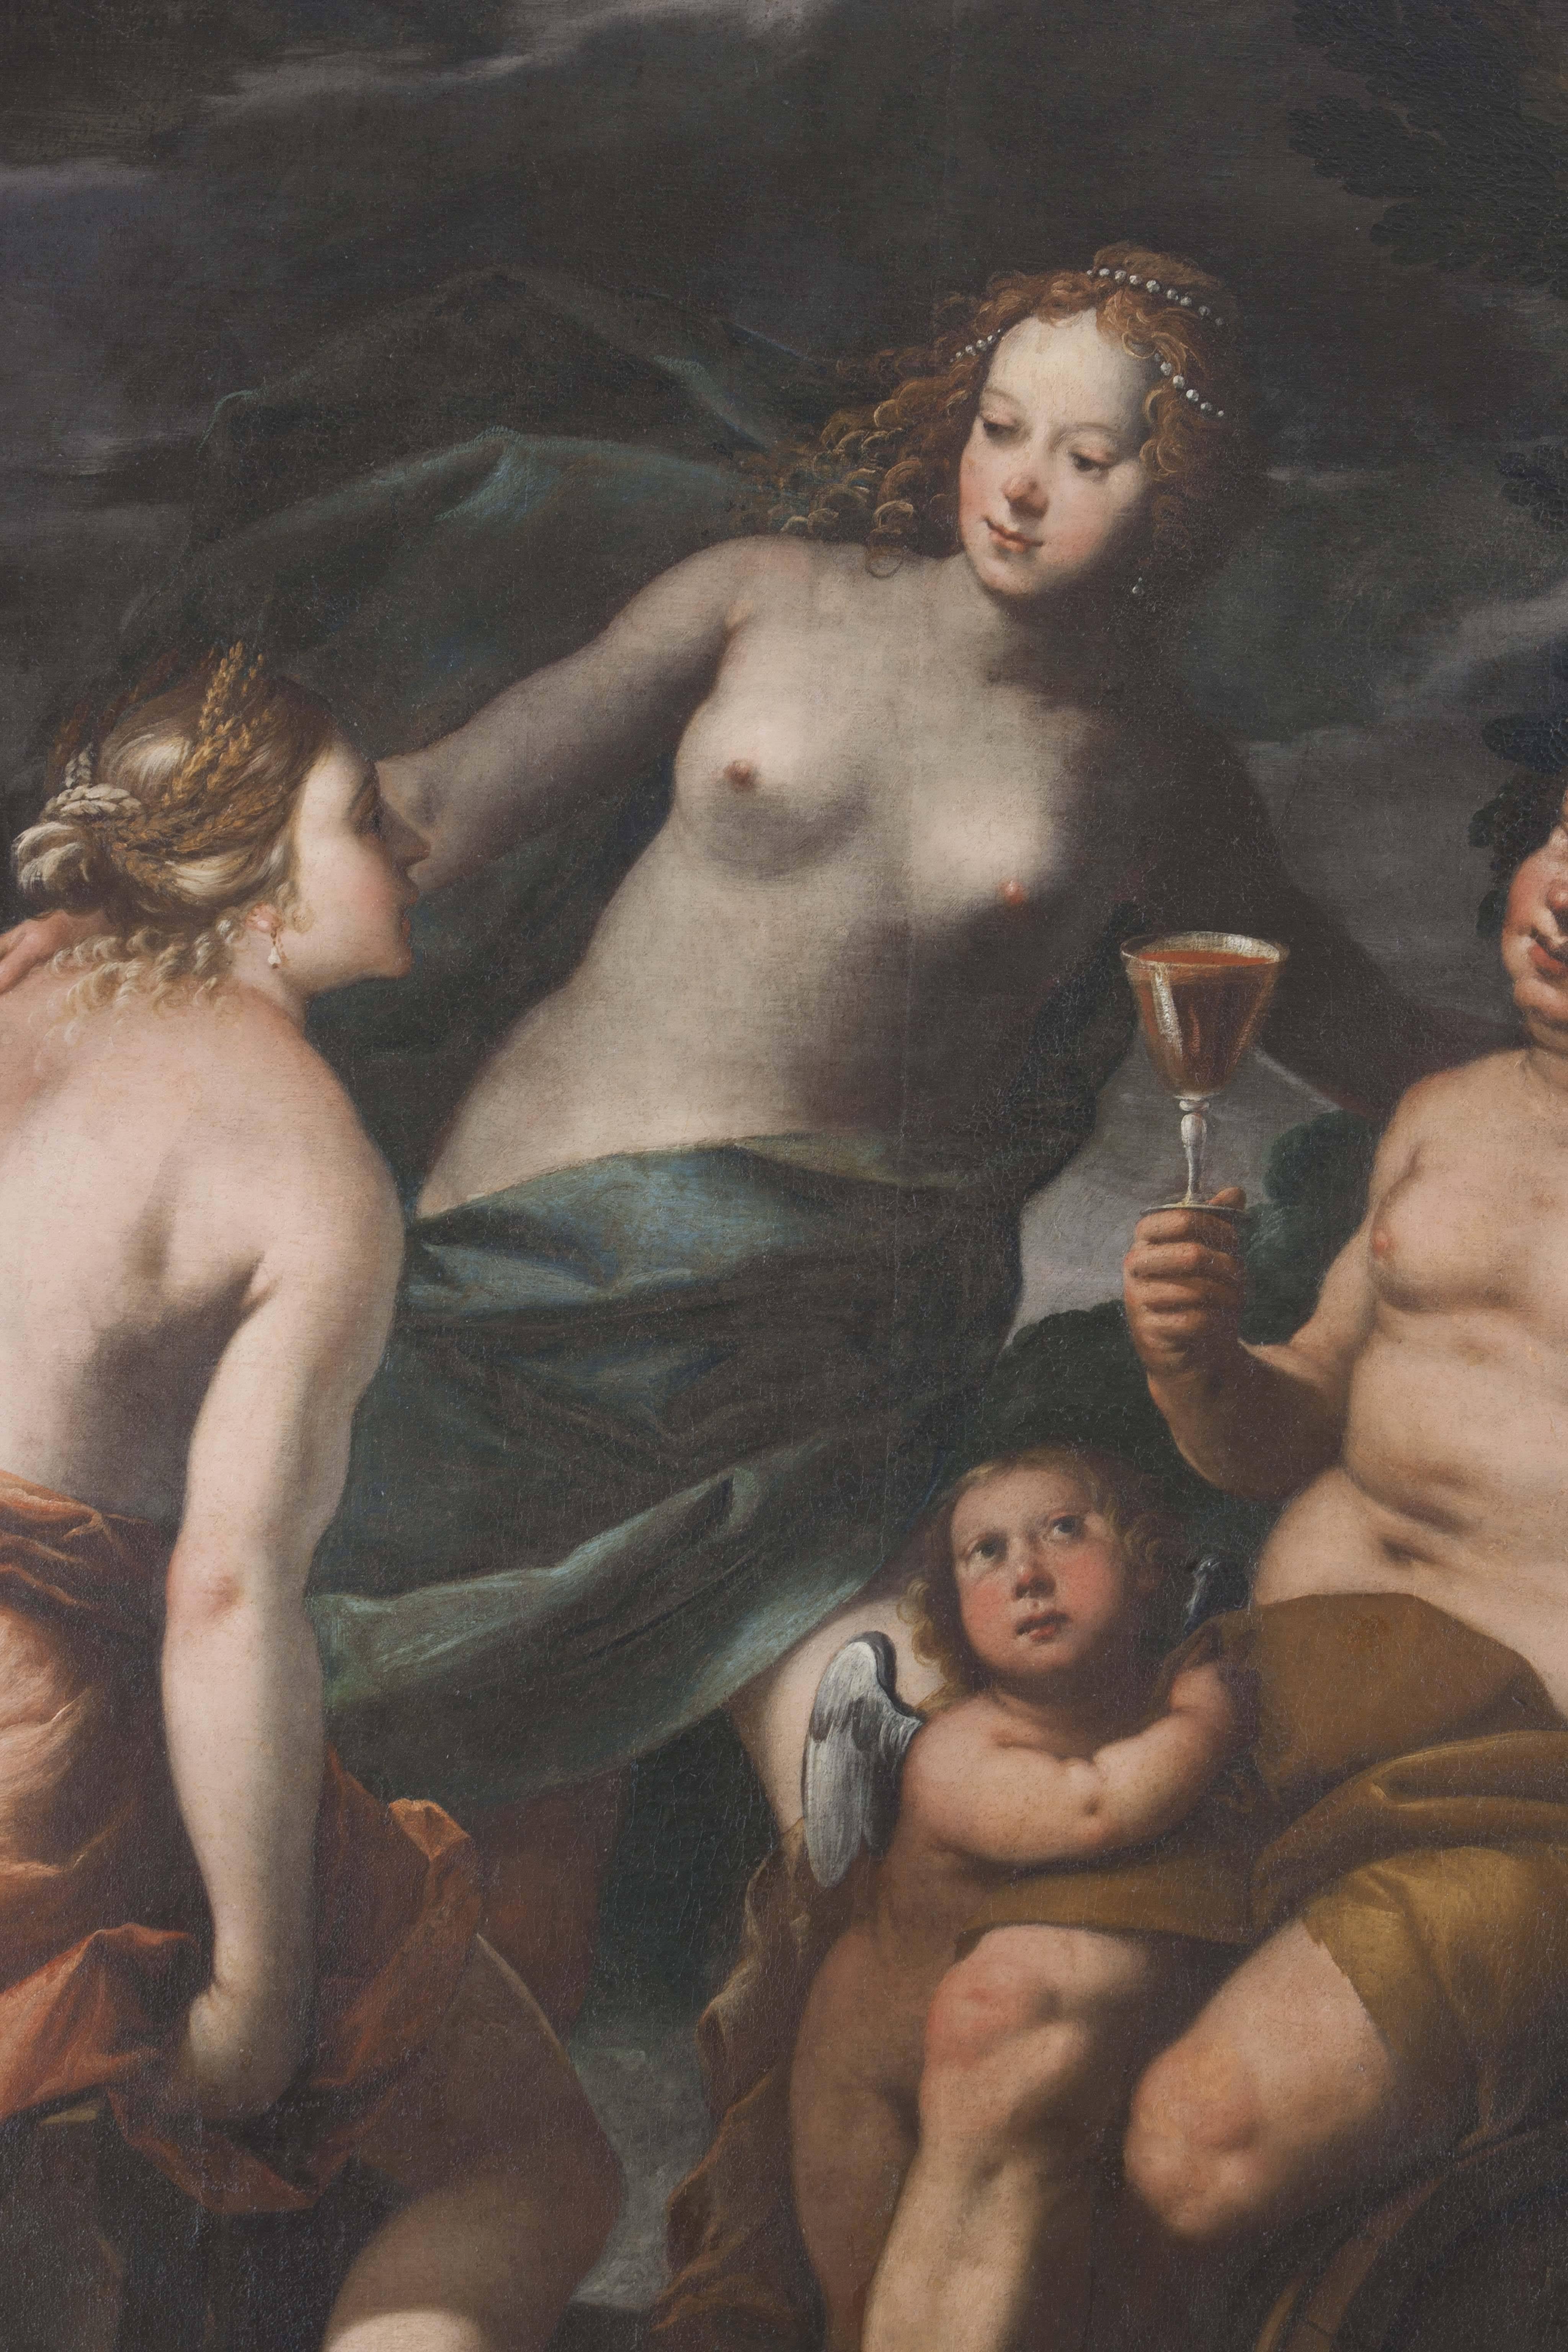 Giuseppe Montalto (1609-1669), Ceres Bacchus and Venus, oil on canvas, measures 221 x 160 cm, very good conditions, beautiful frame of the same age, lacquered and gilded.
Venus, standing in the center, accompanied by a small Love, hugs Ceres,